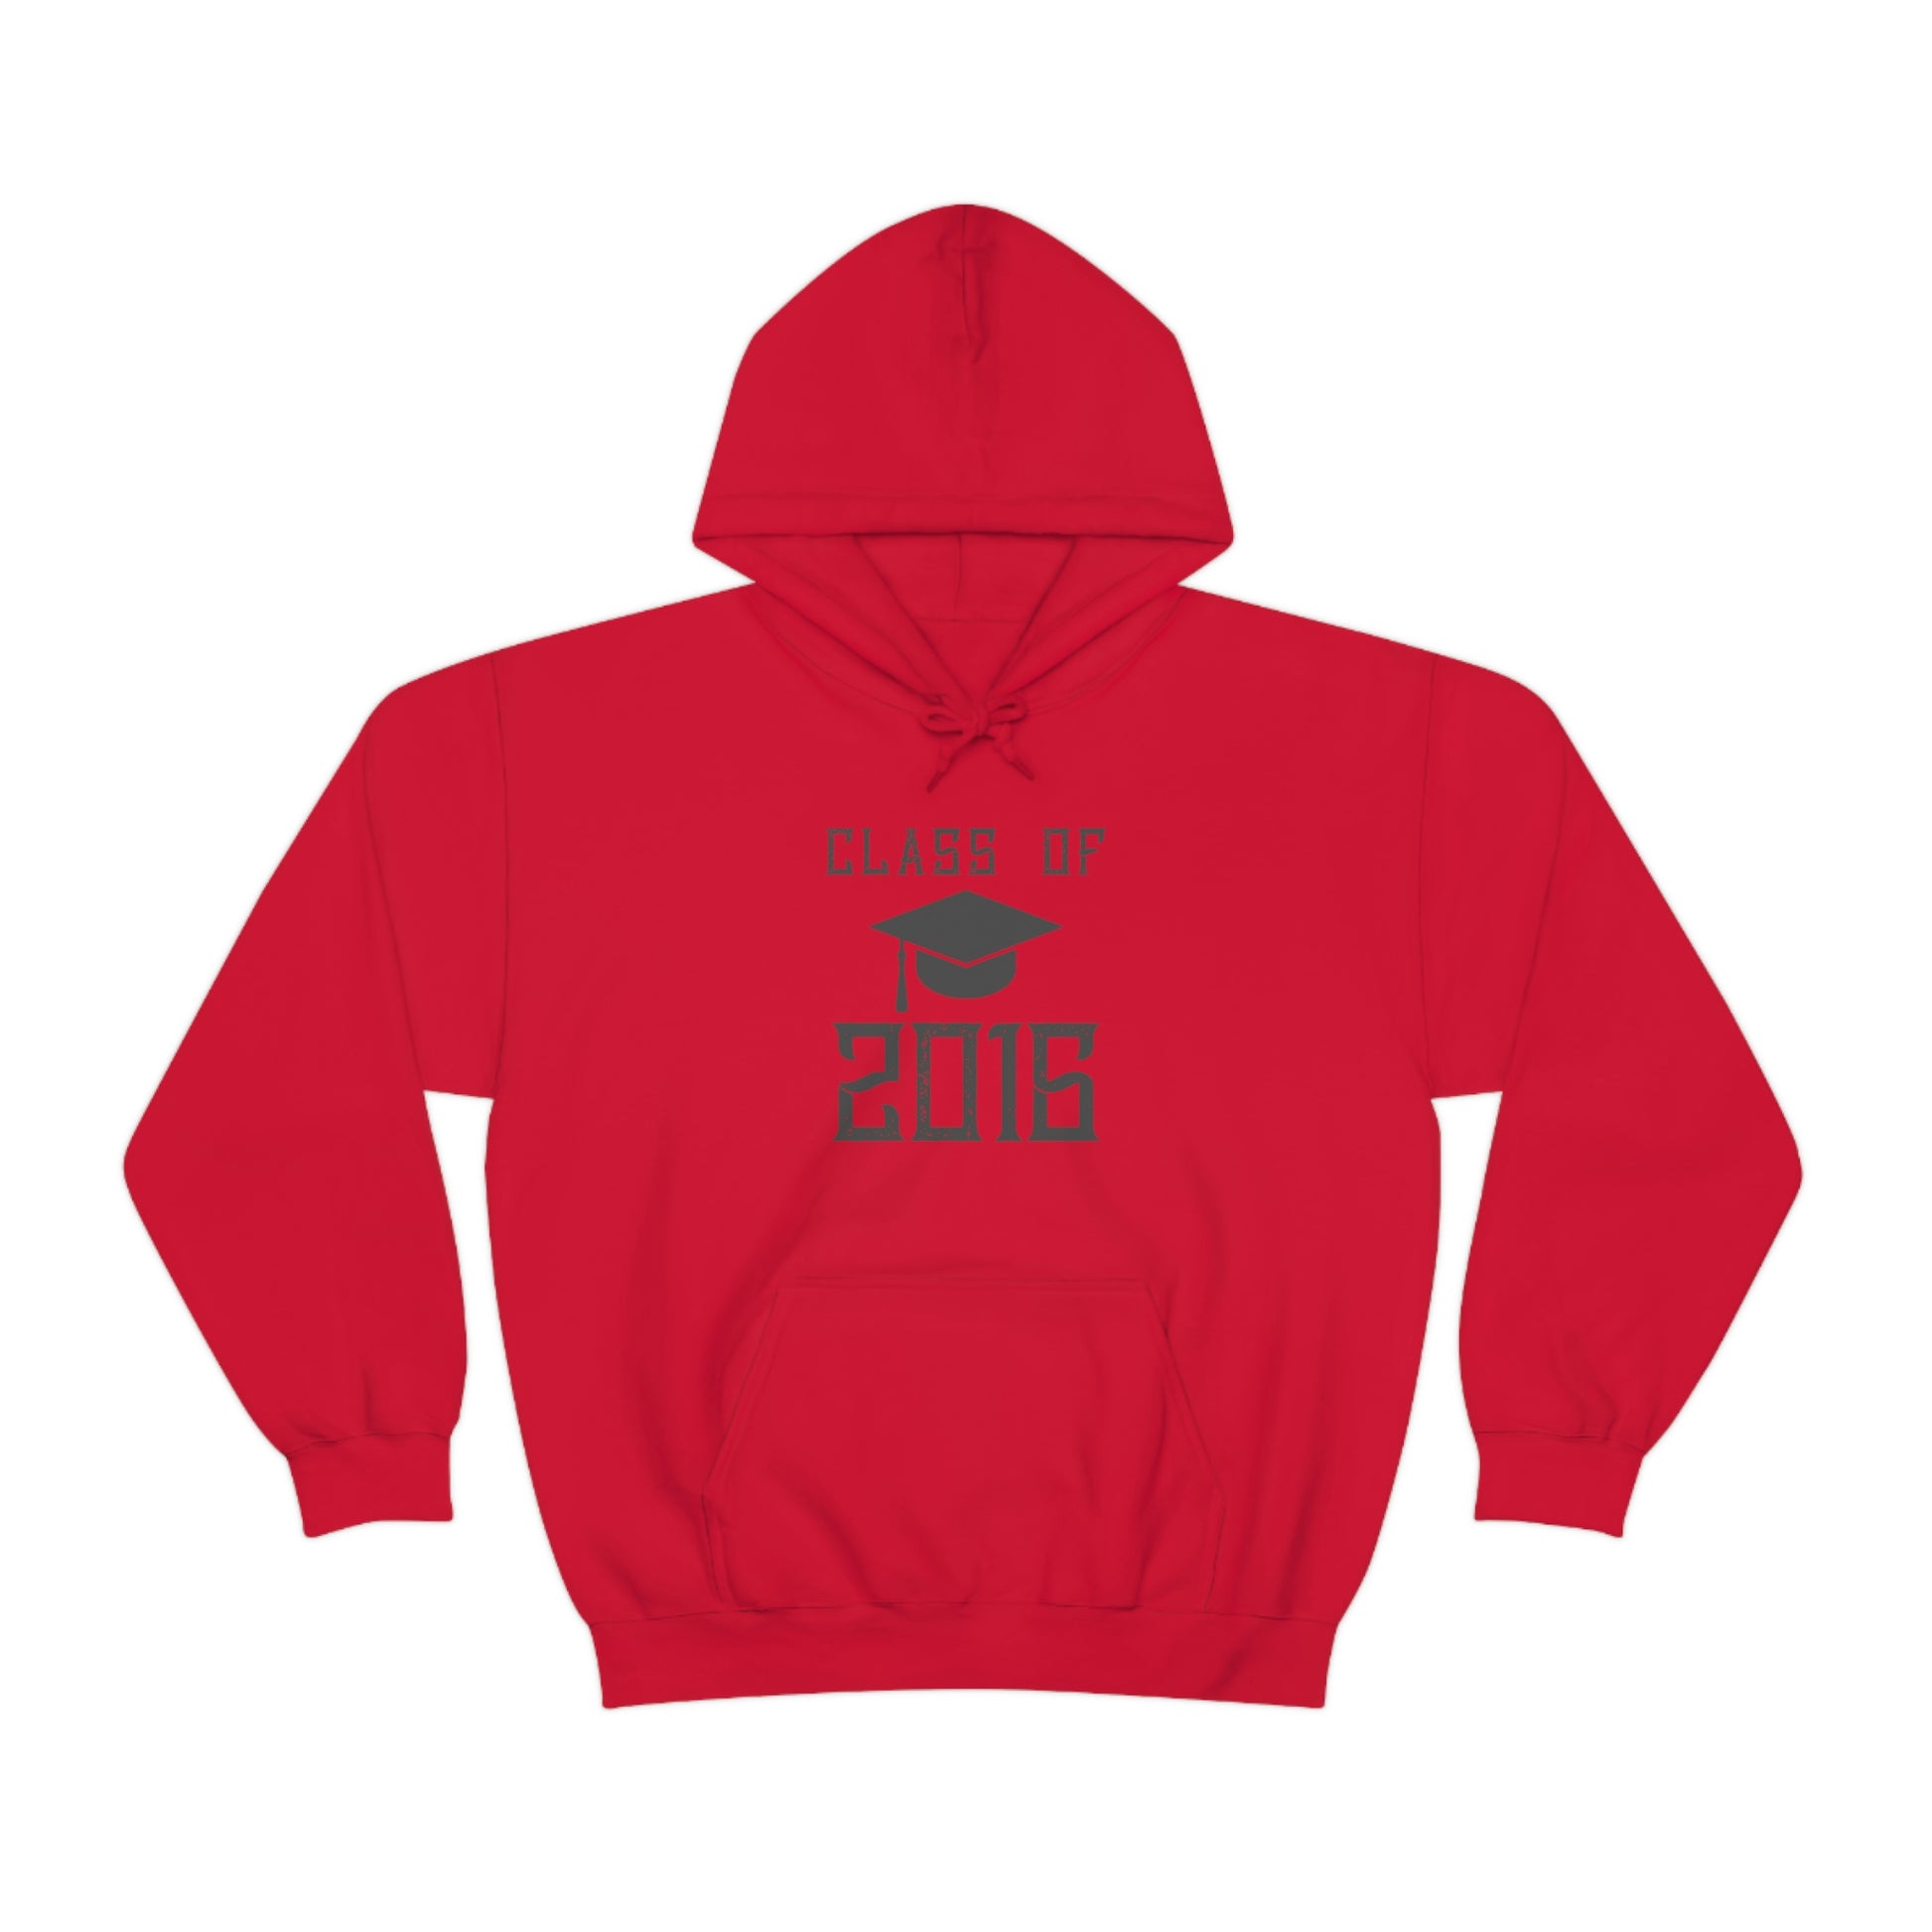 "Class Of 2016" Hoodie - Weave Got Gifts - Unique Gifts You Won’t Find Anywhere Else!